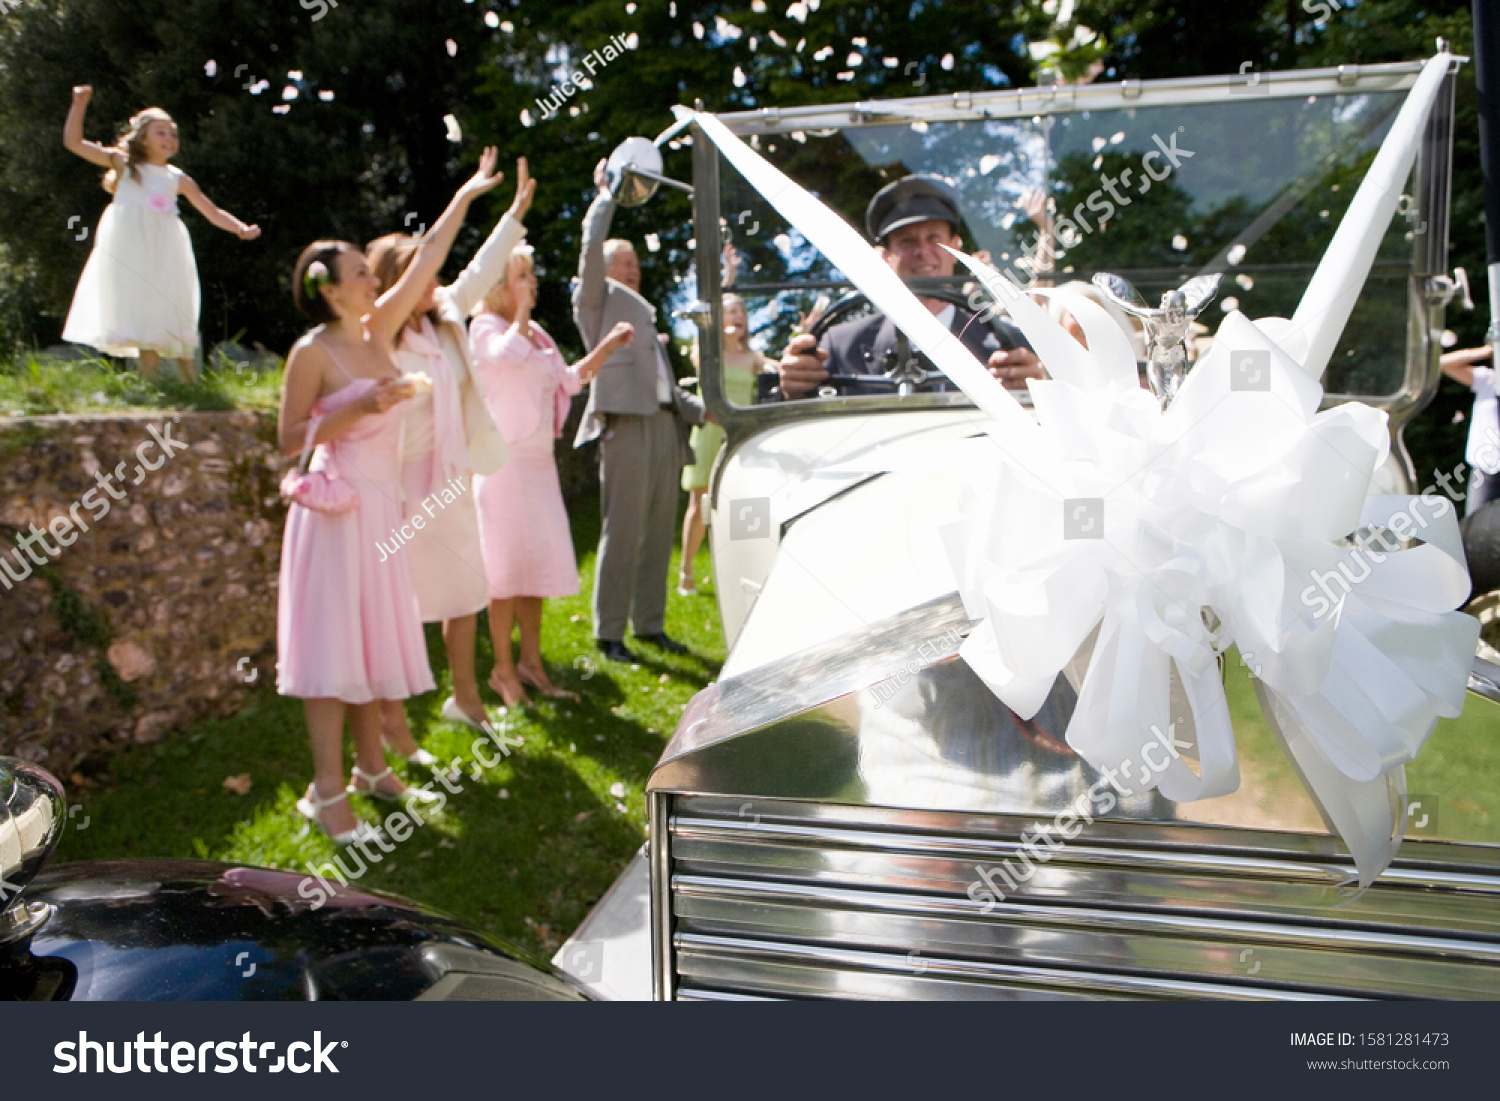 Bridal party waving to bride and groom in vintage car on wedding day #1581281473